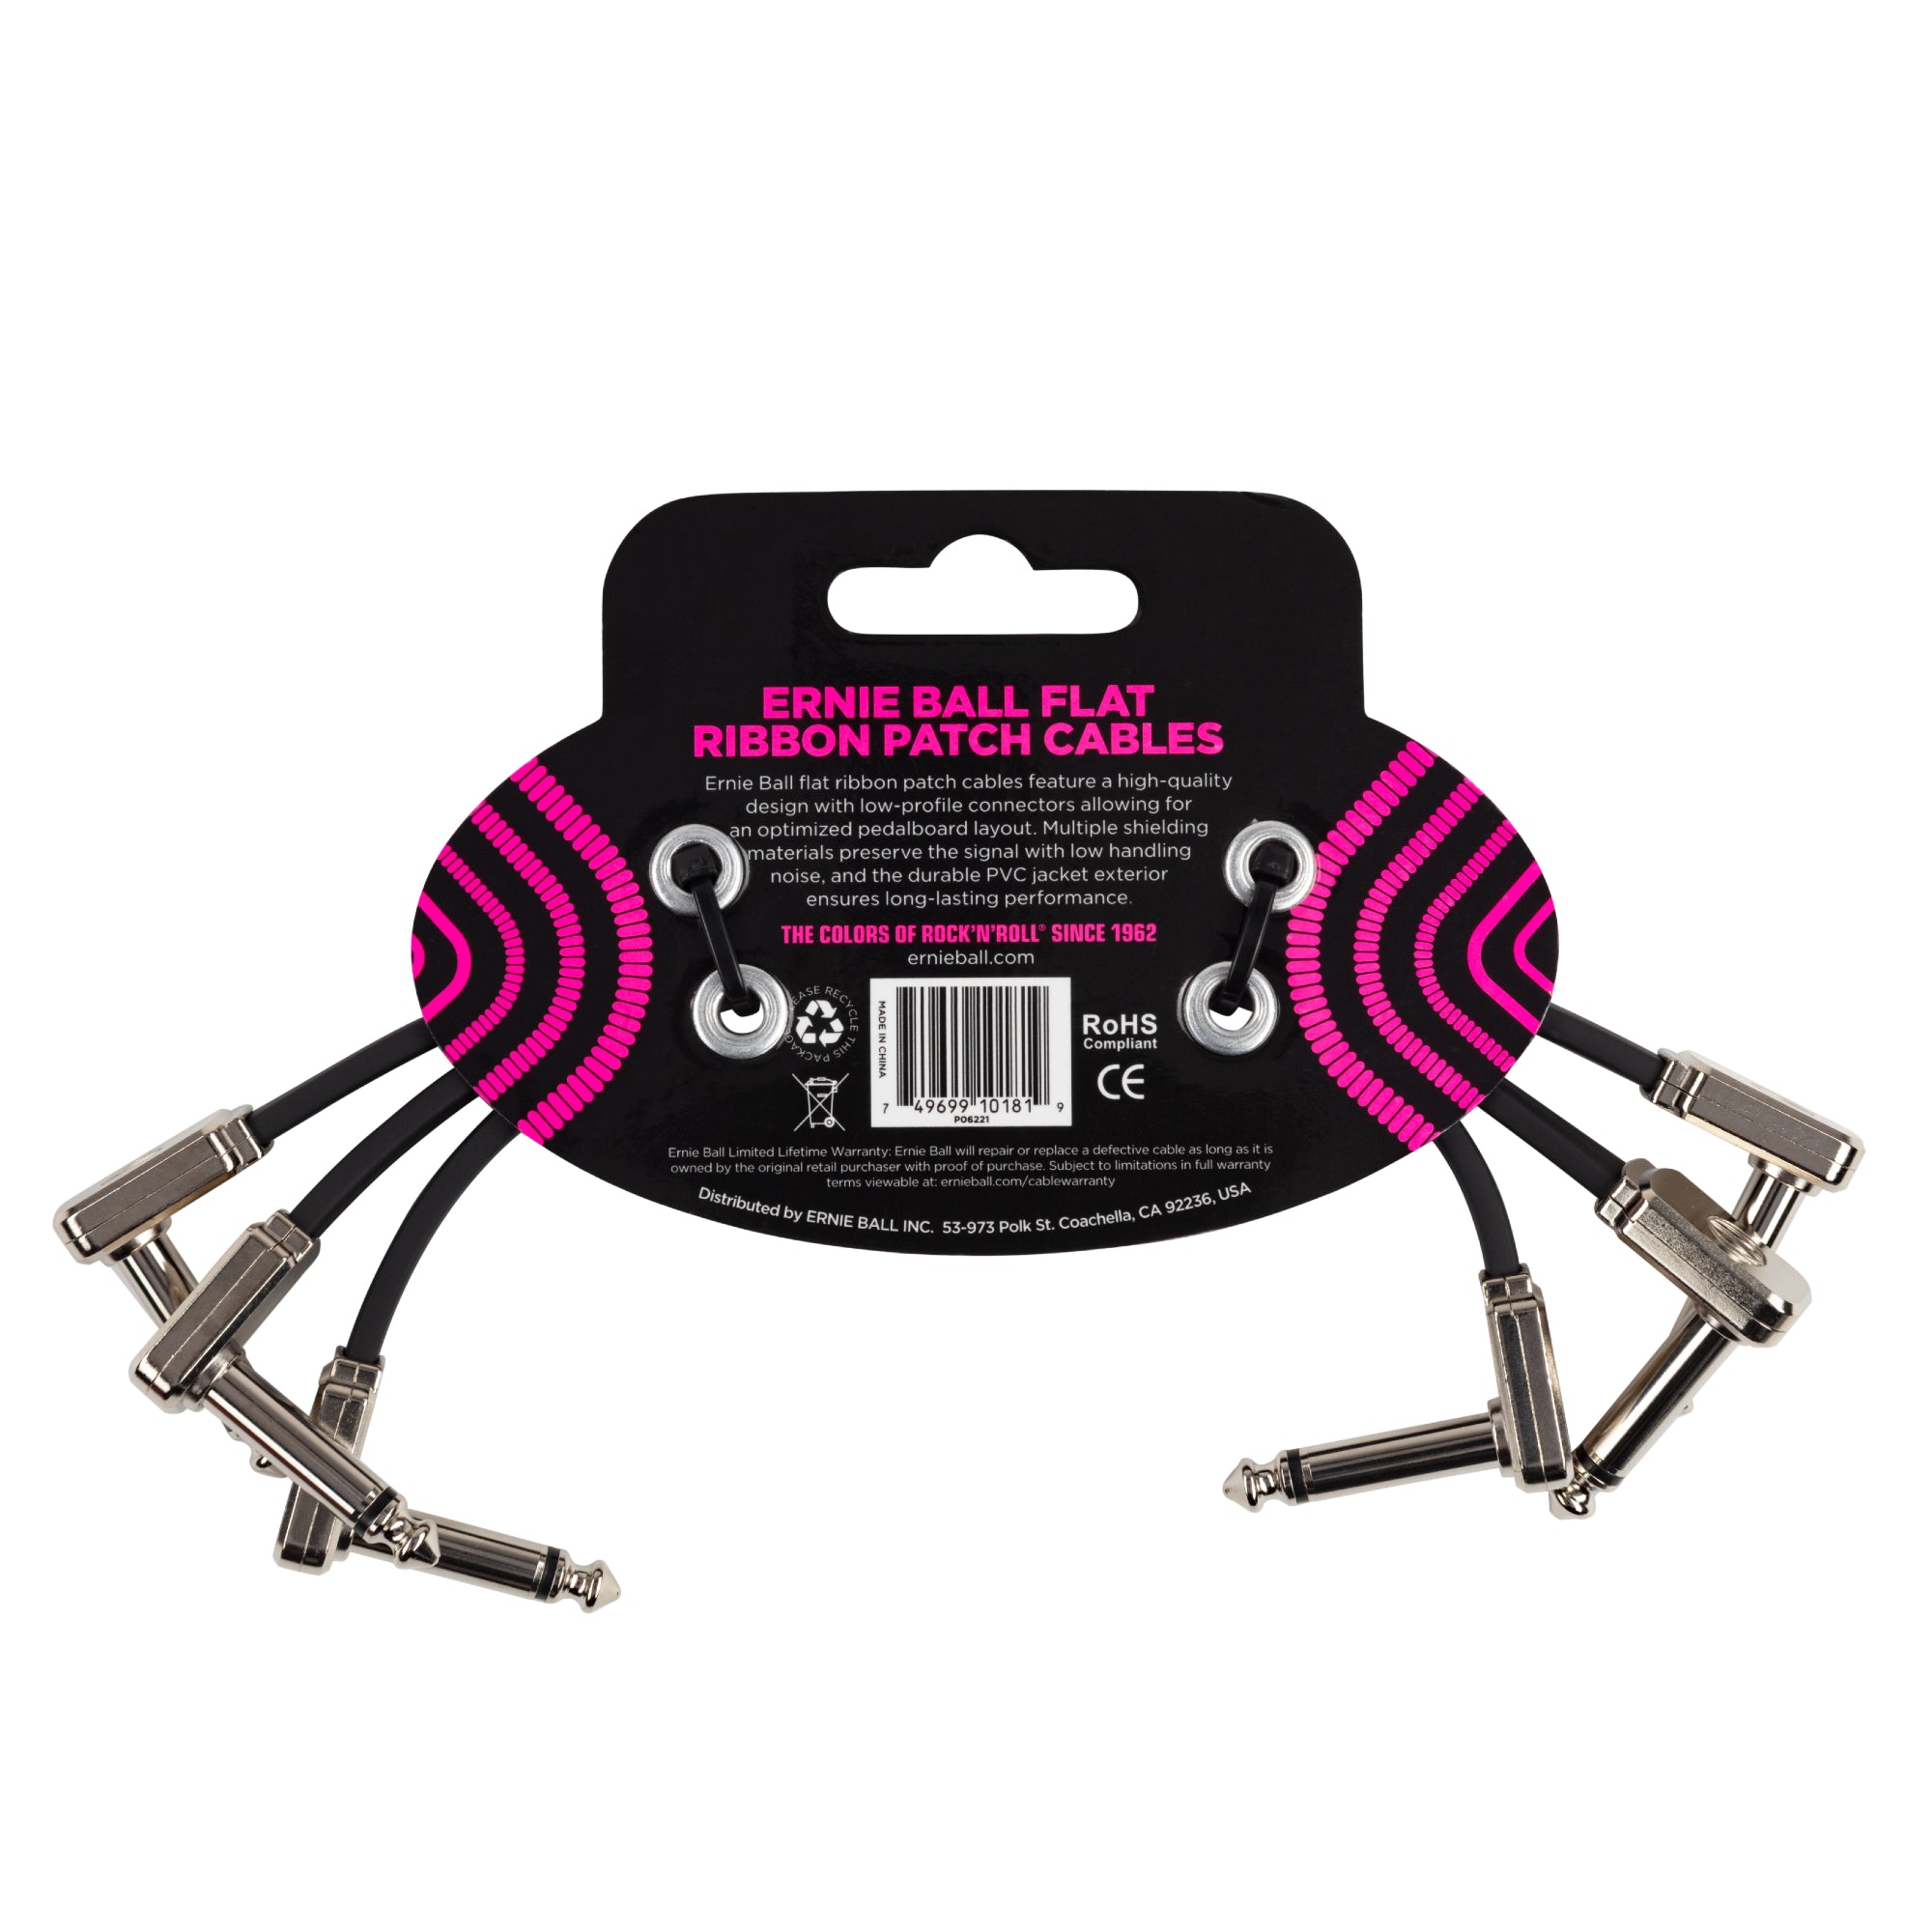 Ernie Ball 6221 6" Flat Ribbon Patch Cable 3-Pack P06221